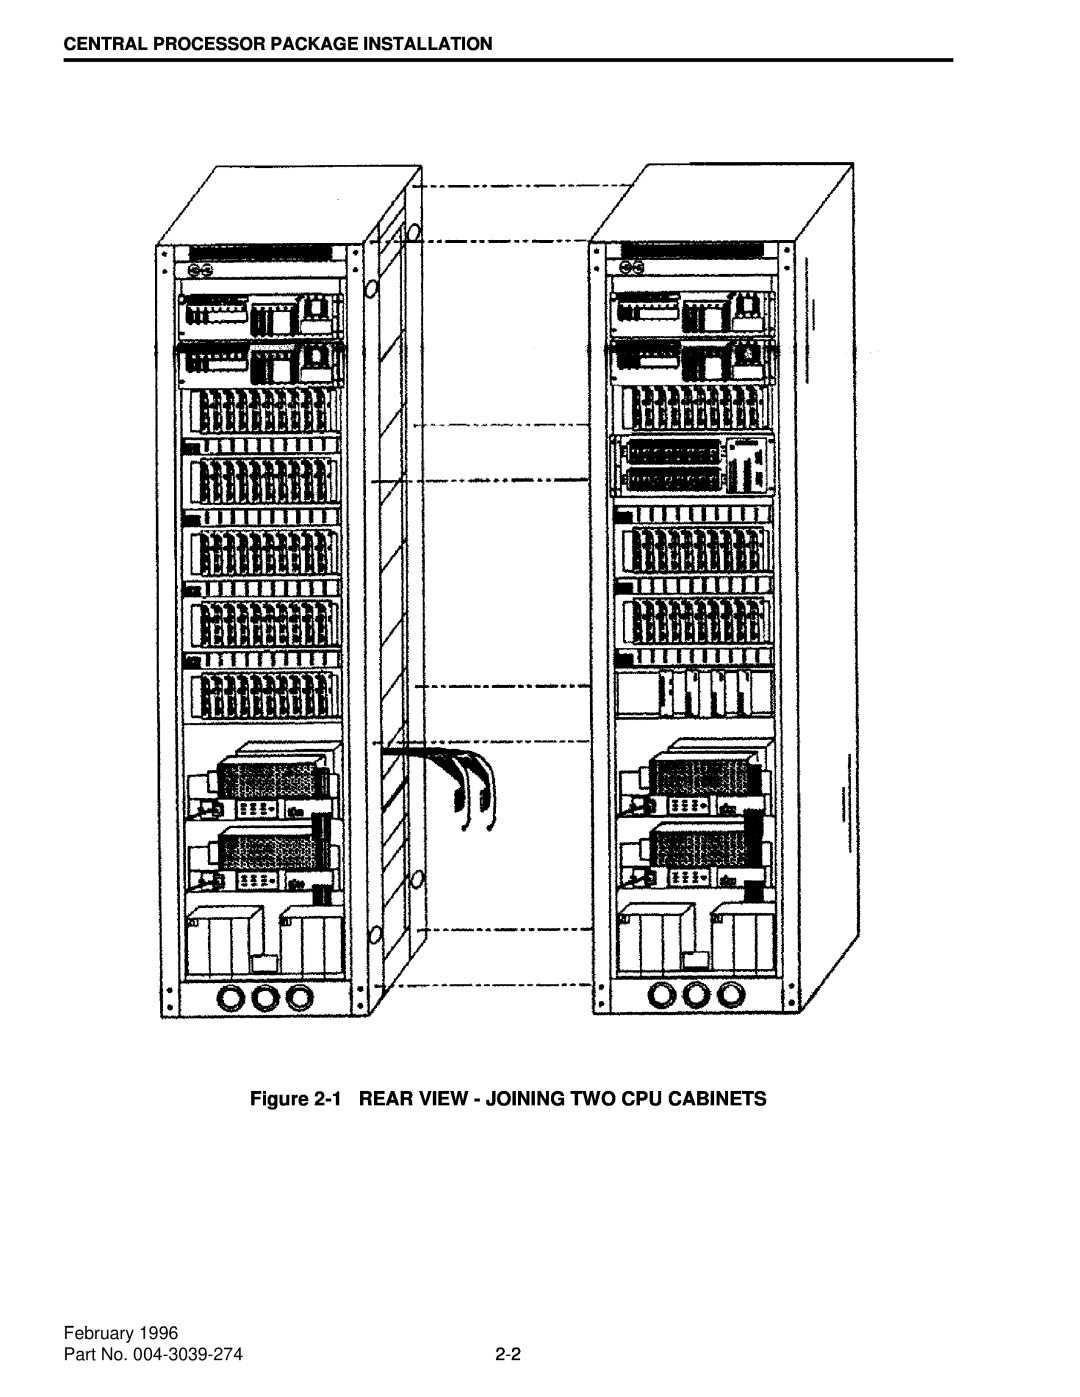 EFJohnson VR-CM50 manual 1REAR VIEW - JOINING TWO CPU CABINETS, Central Processor Package Installation, February 